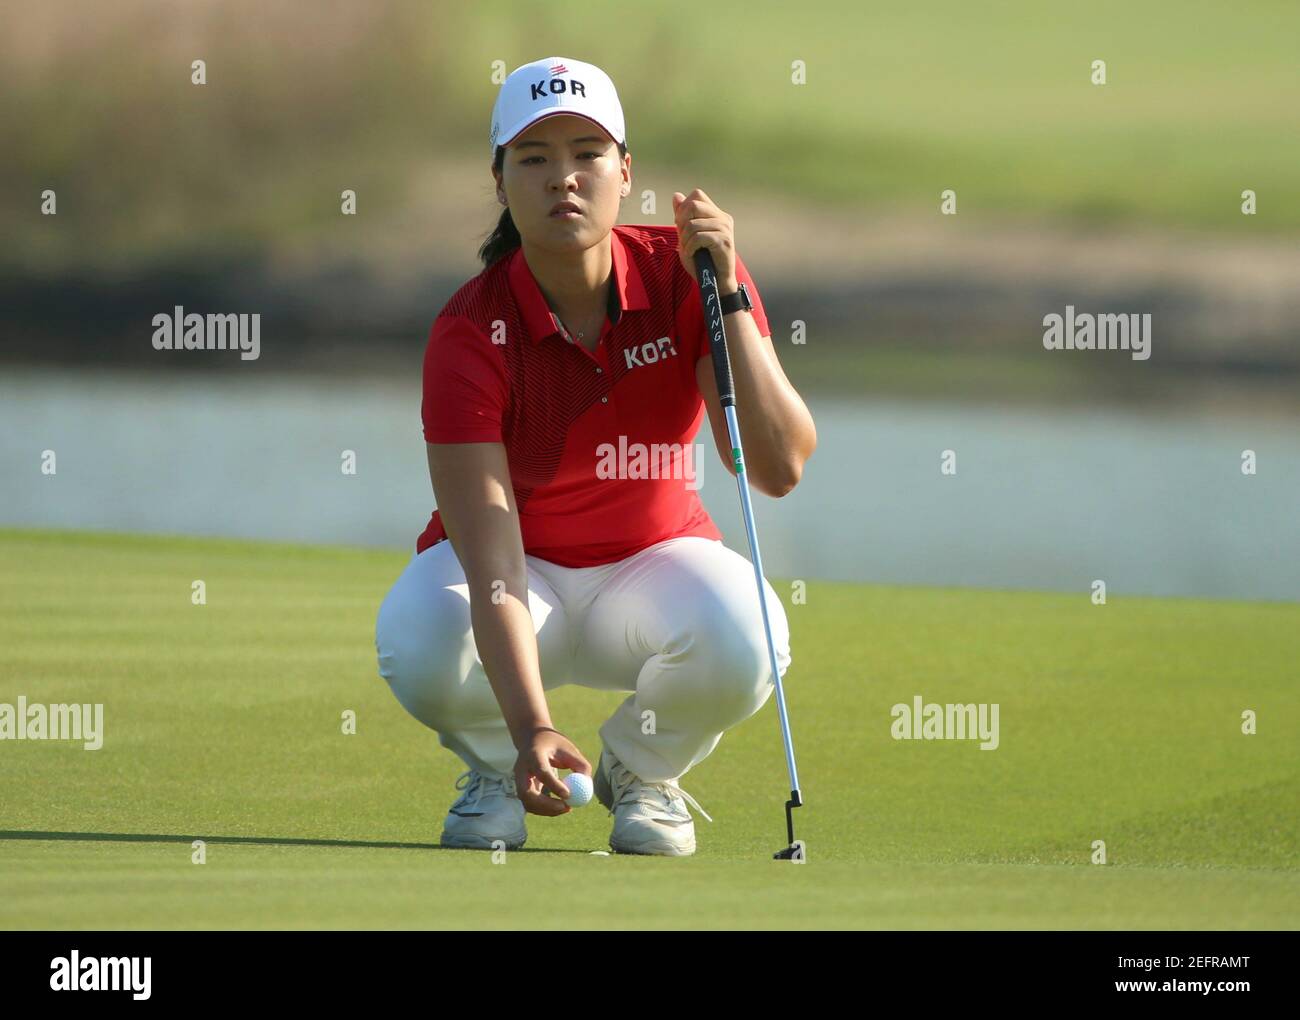 2016 Rio Olympics - Golf -  Women's Individual Stroke Play - Olympic Golf Course - Rio de Janeiro, Brazil - 17/08/2016.  In-Gee Chun (KOR) of Korea lines up a putt during first round women's Olympic golf competition.  REUTERS/Kevin Lamarque FOR EDITORIAL USE ONLY. NOT FOR SALE FOR MARKETING OR ADVERTISING CAMPAIGNS.   Picture Supplied by Action Images Stock Photo